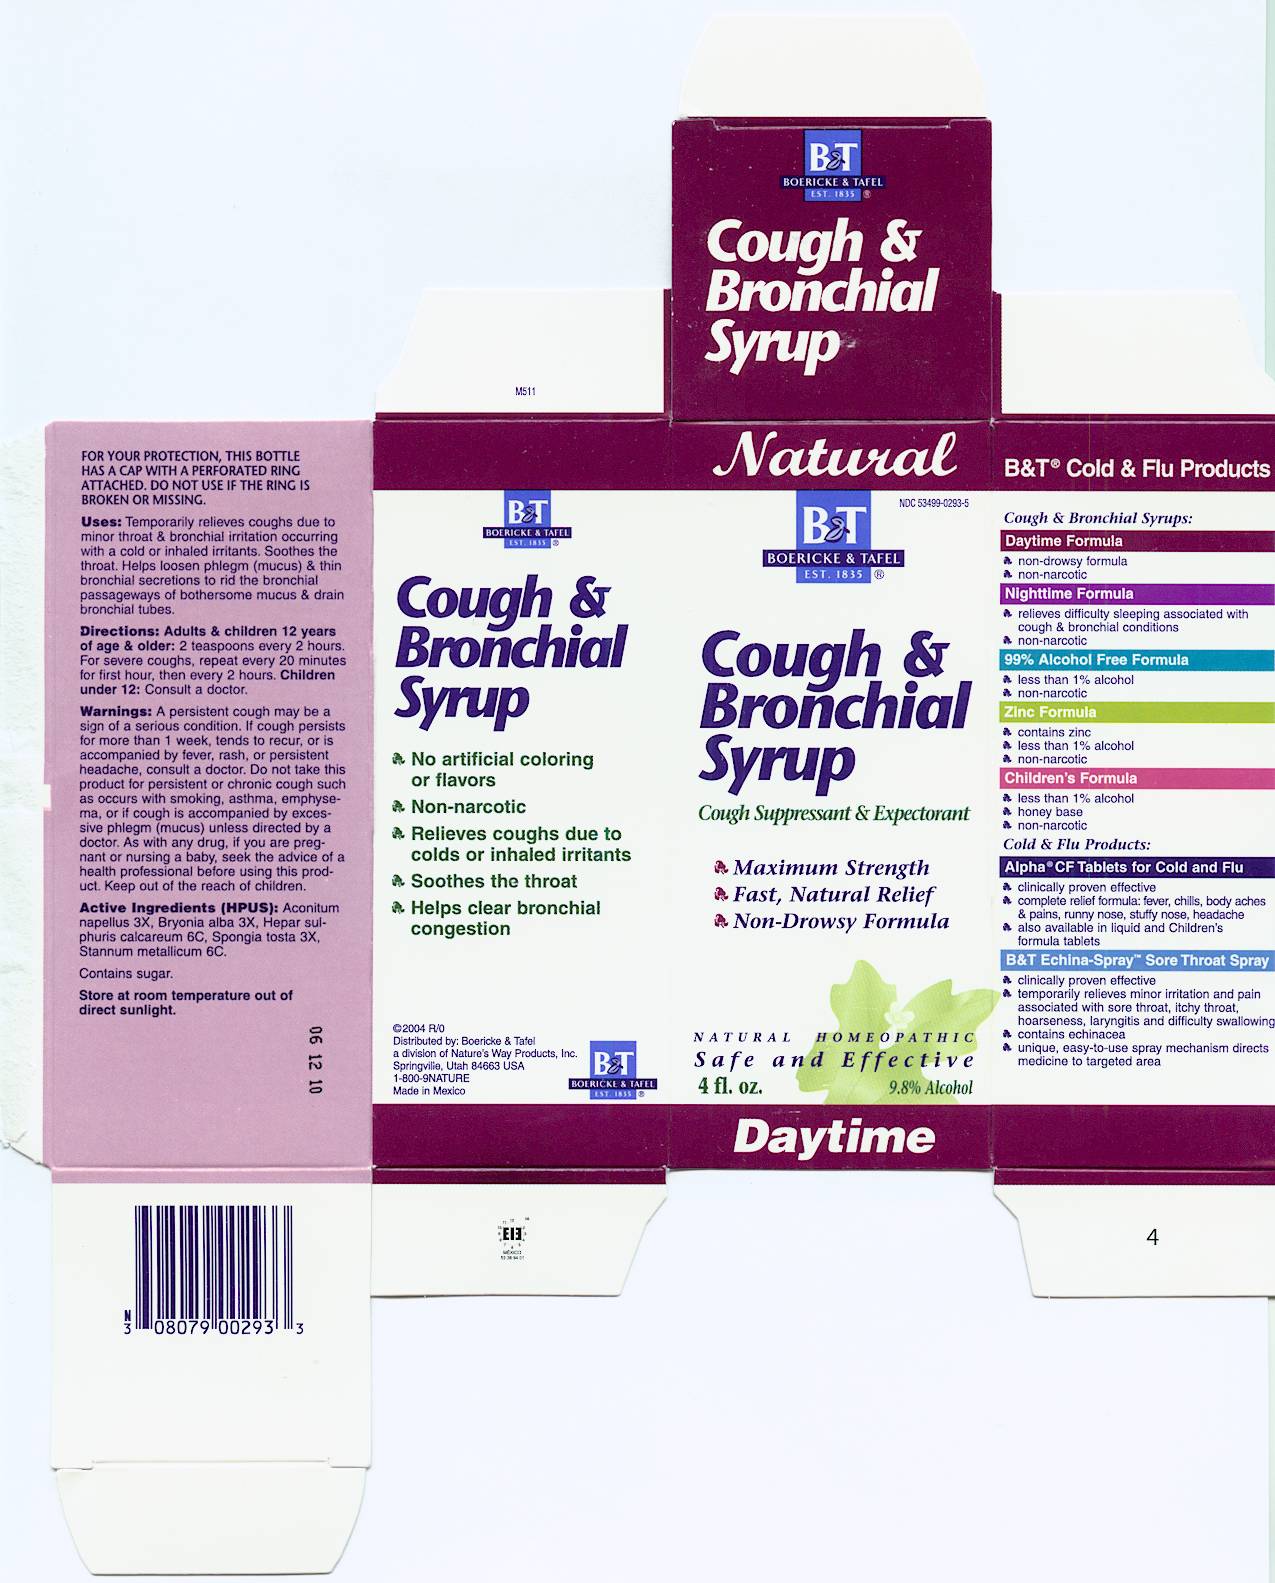 Cough and Bronchial box